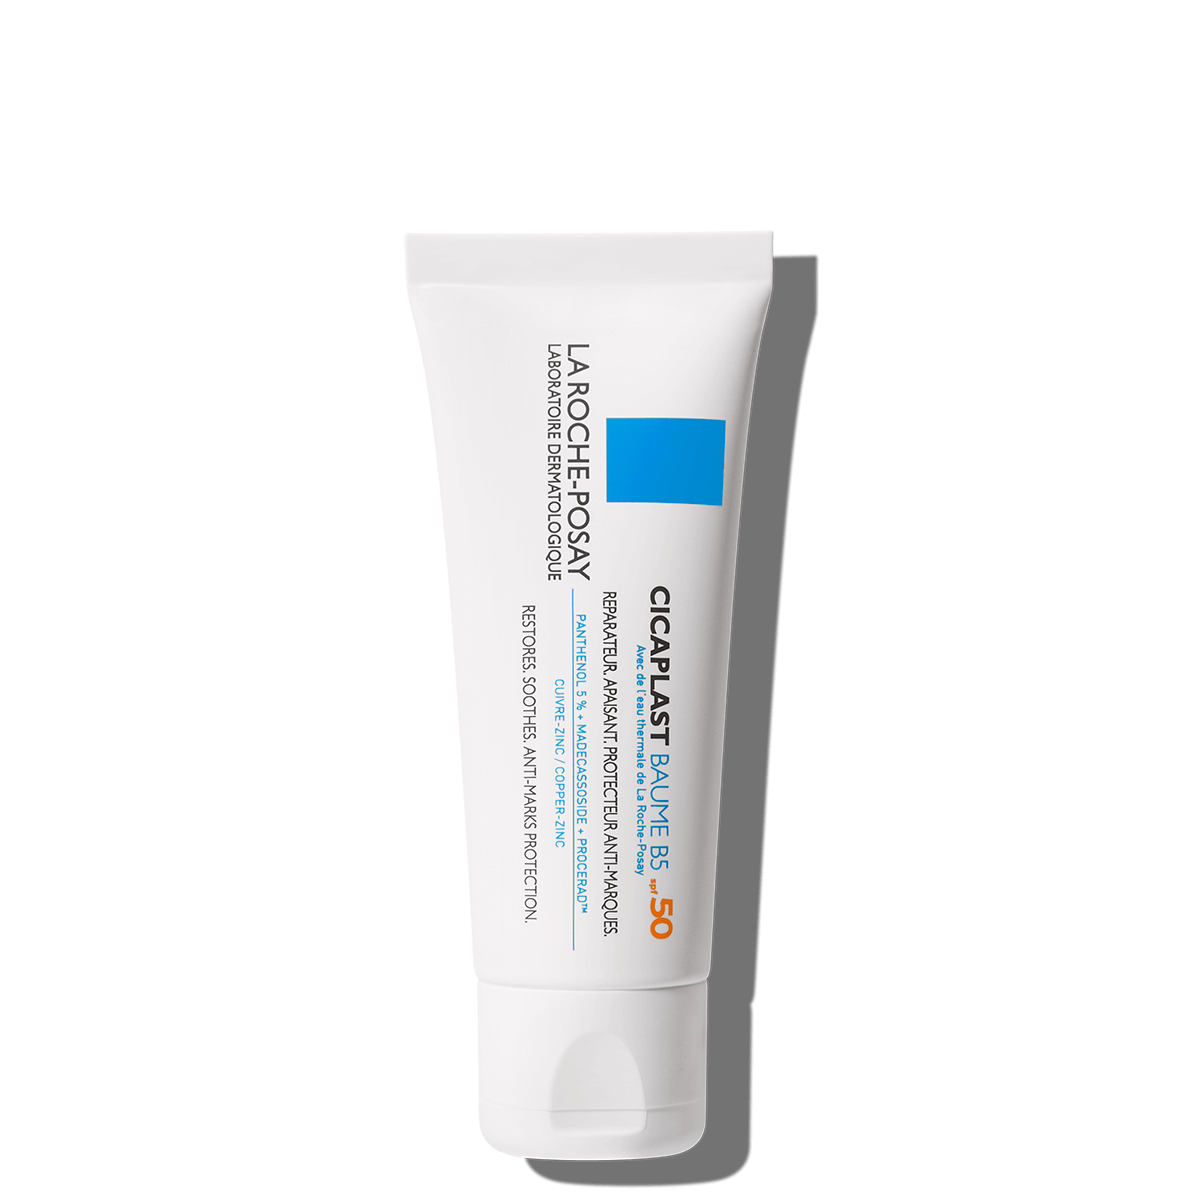 La-Roche-Posay-ProductPage-Damaged-Cicaplast-Baume-B5-Spf50-40ml-3337875517300-Front